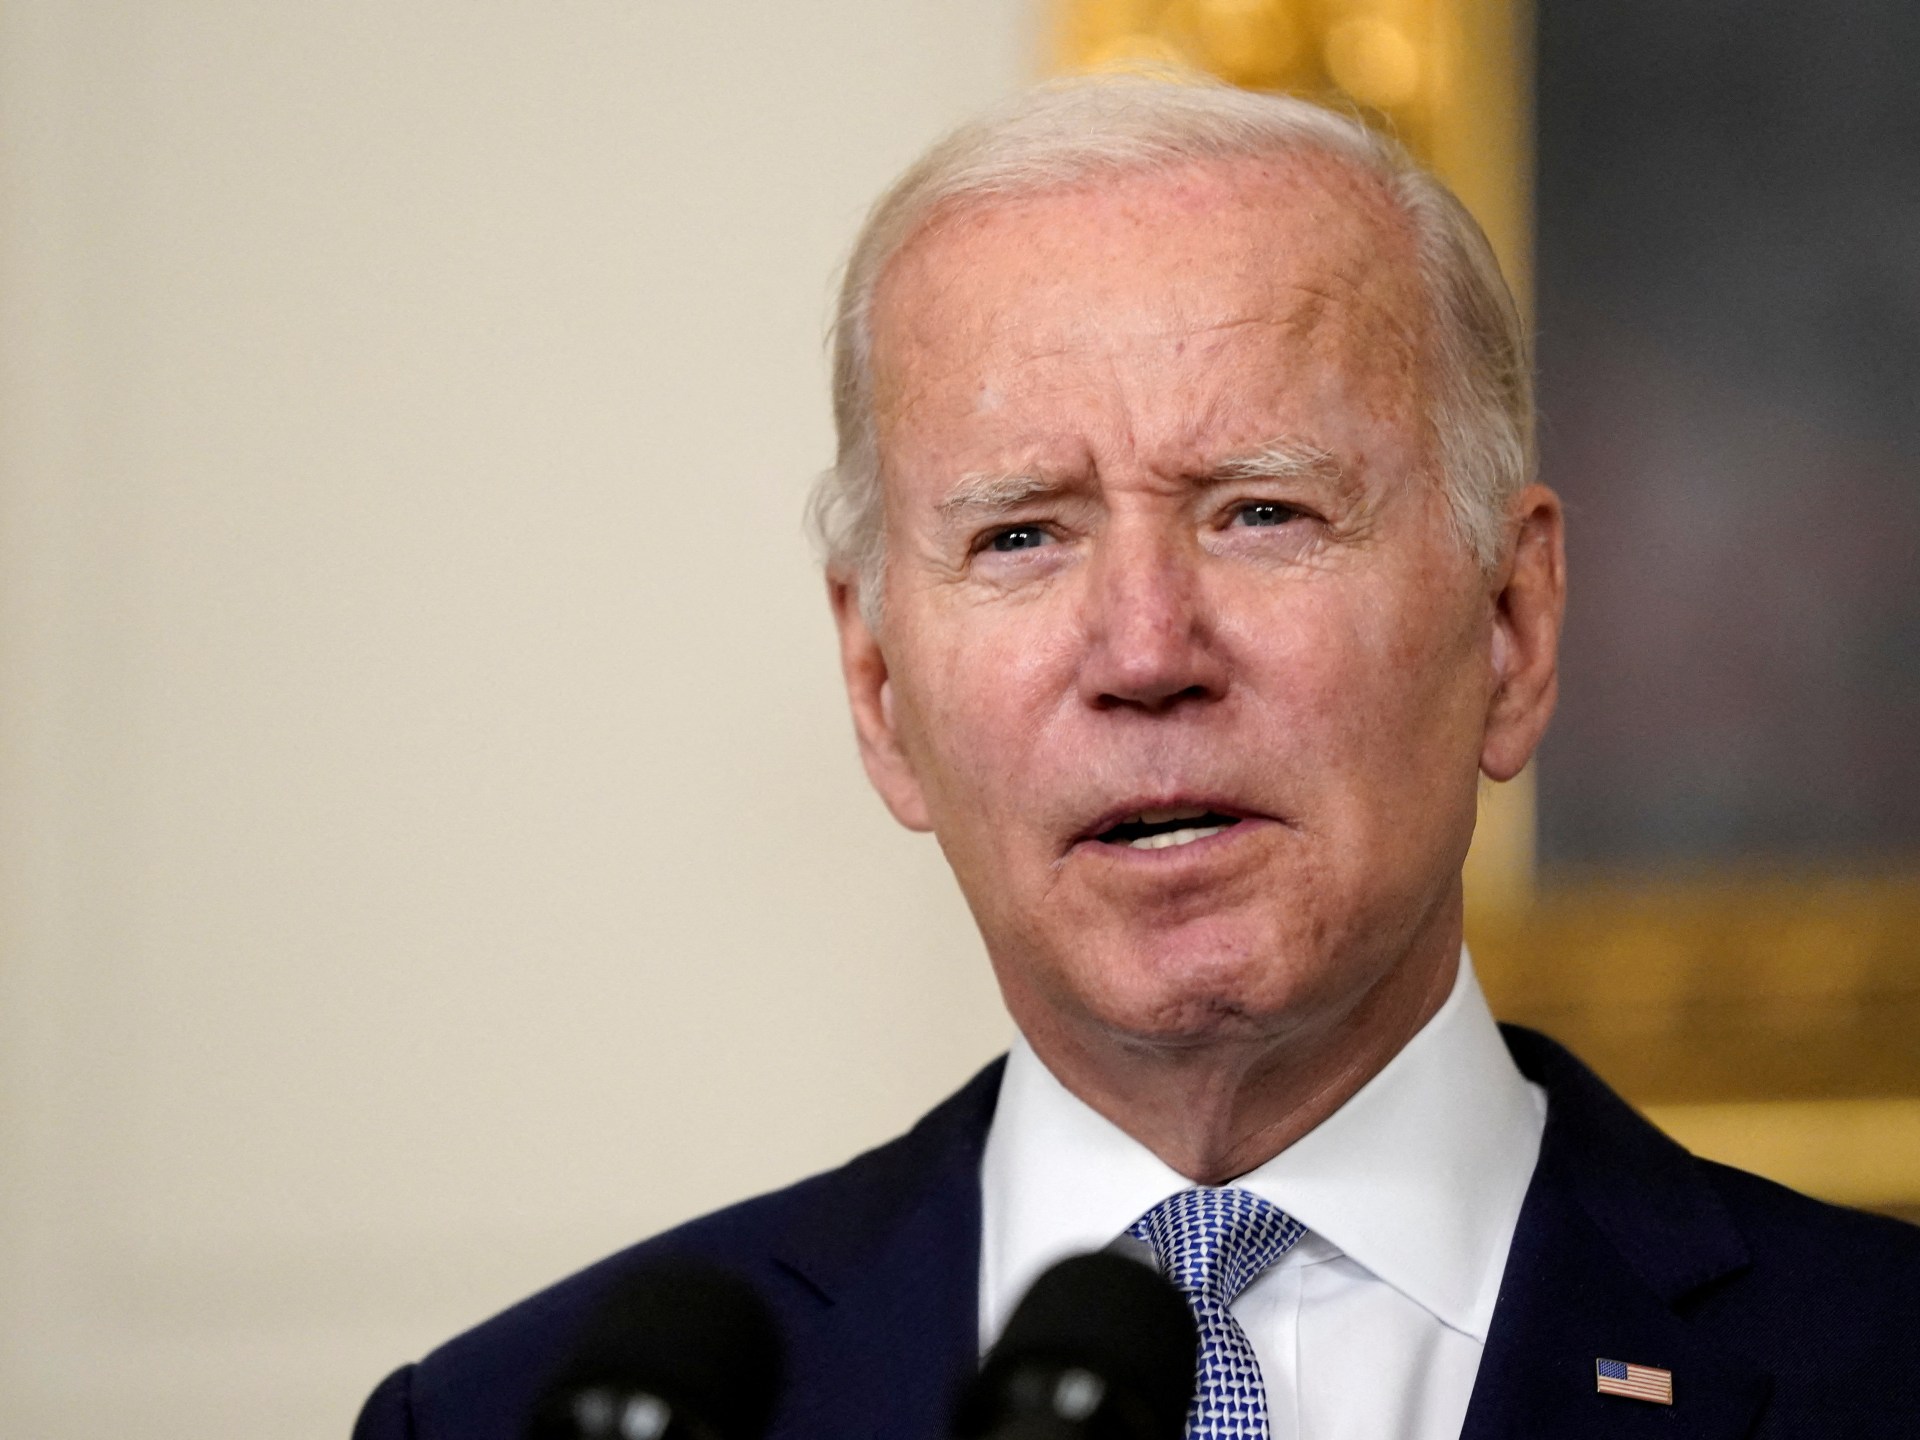 biden-reviewing-ties-with-saudi-arabia-amid-anger-over-oil-cuts